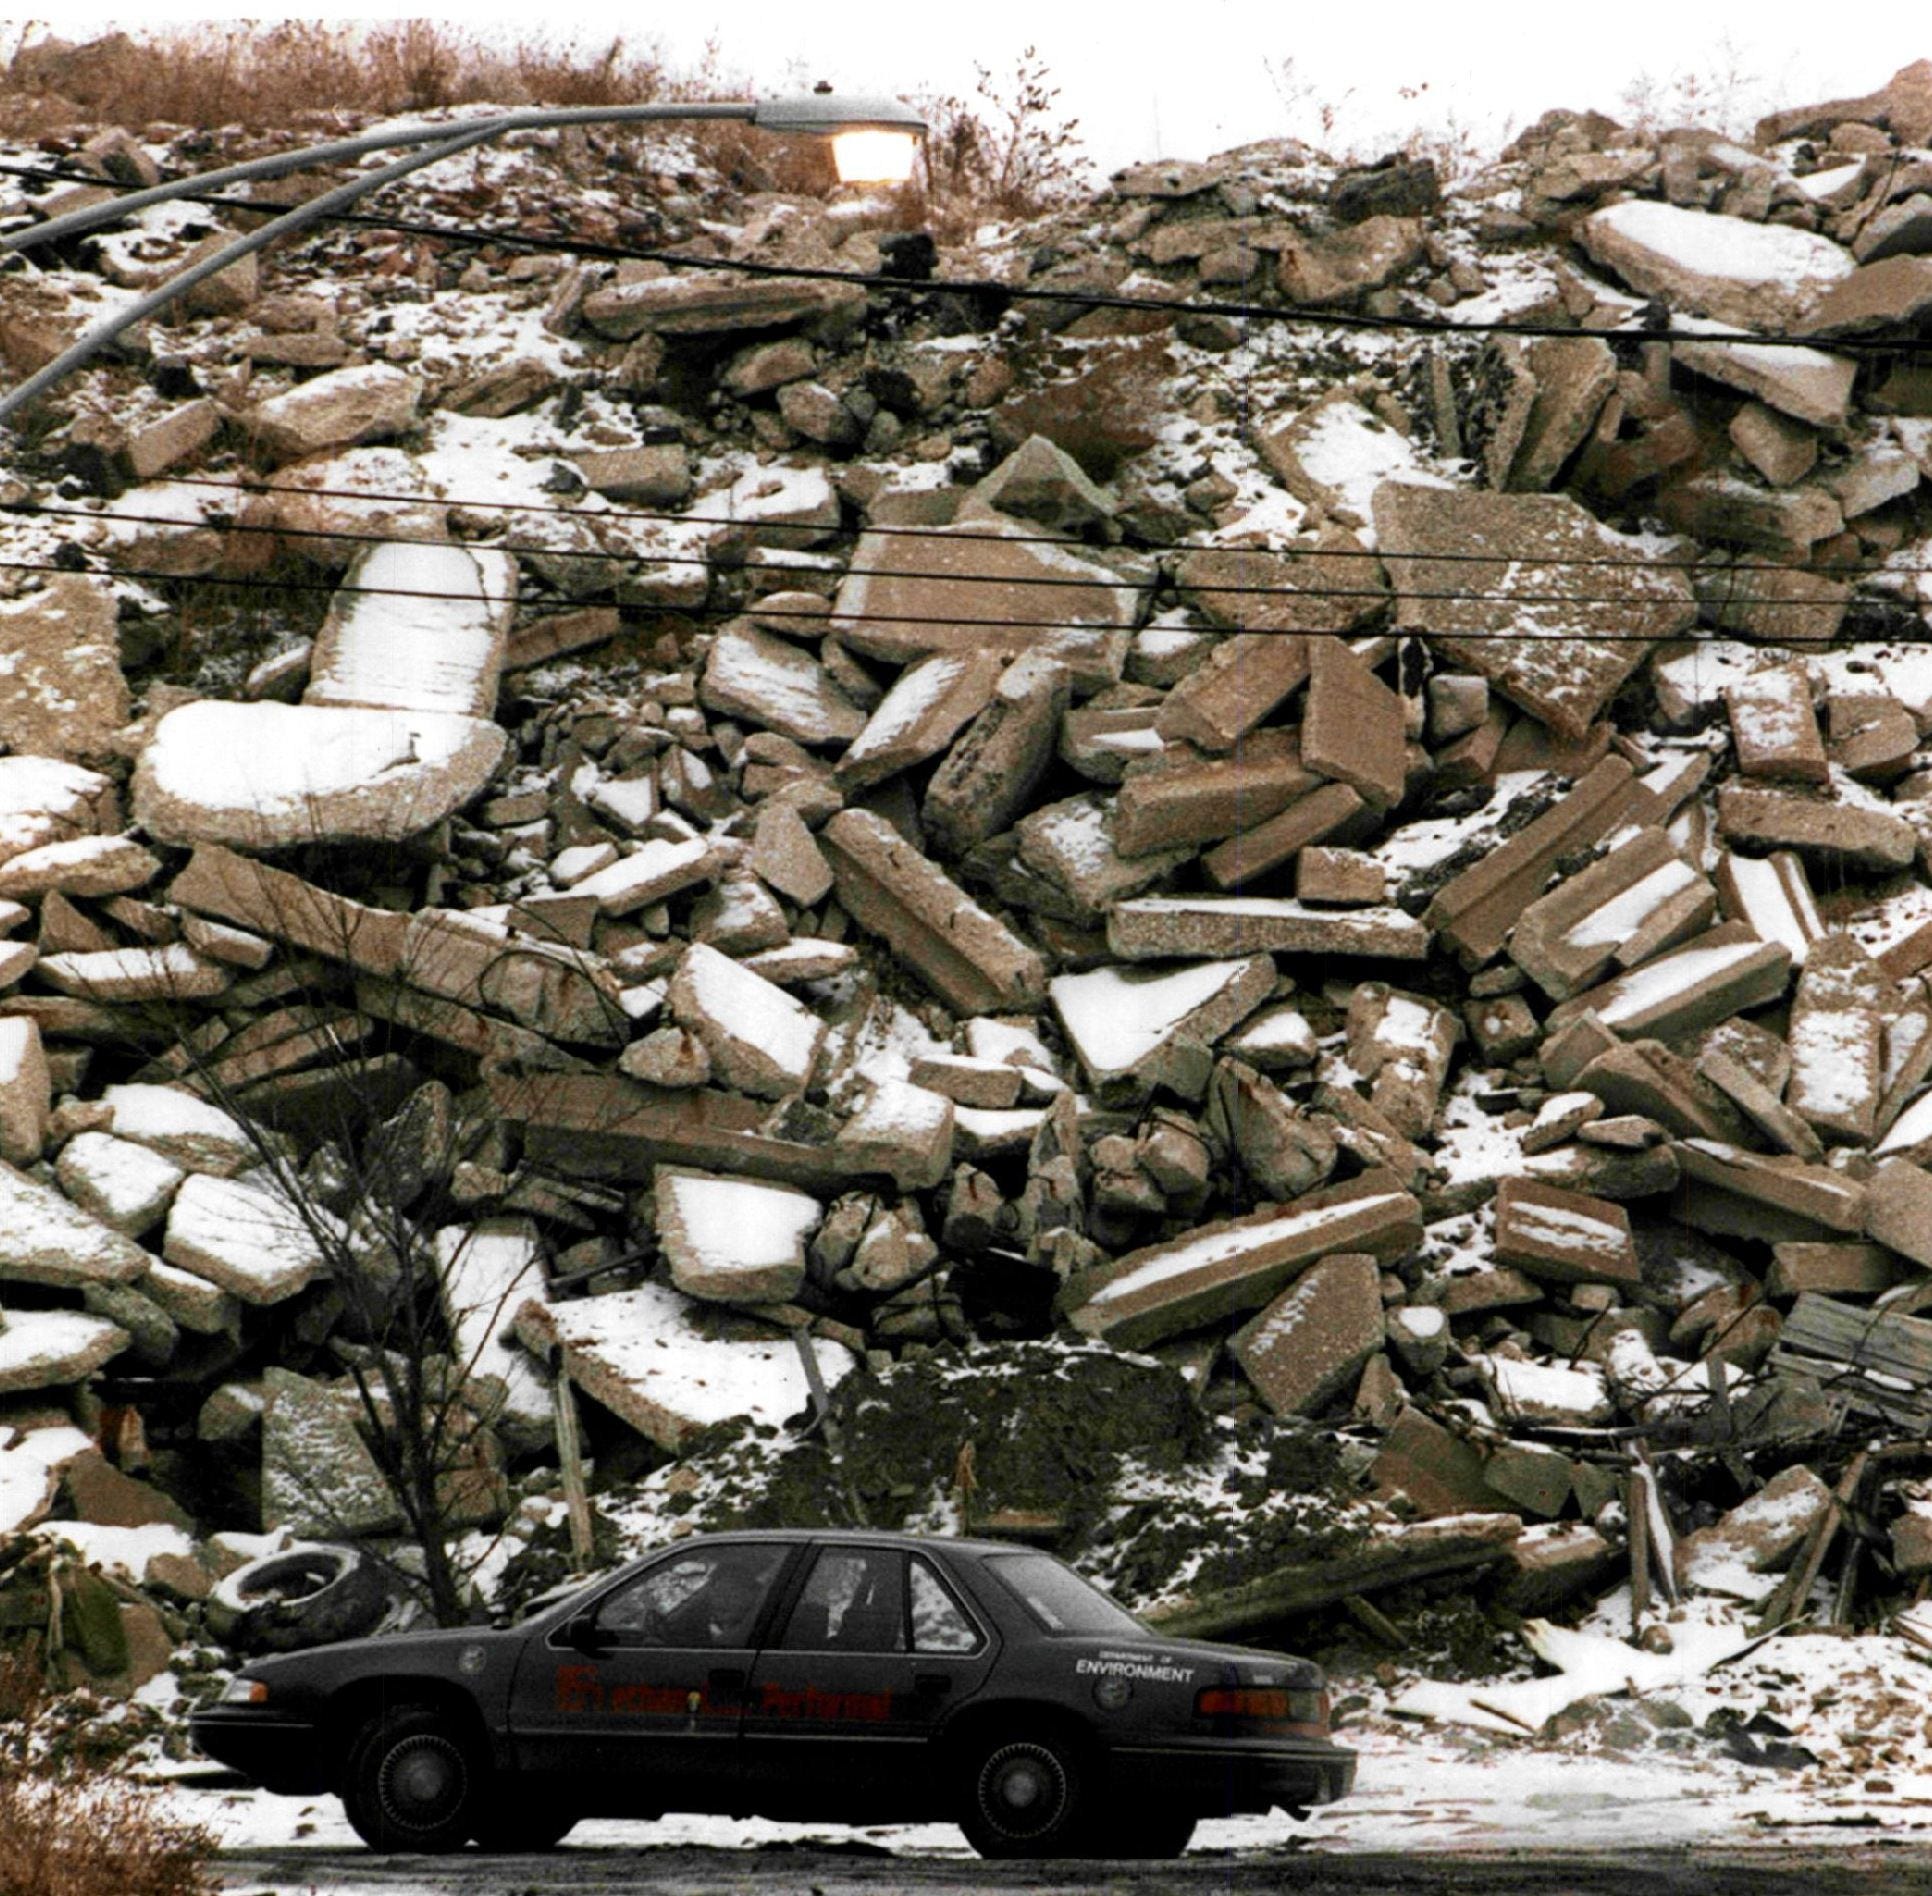 The illegal construction debris dump in Chicago's North Lawndale neighborhood in January 1996.